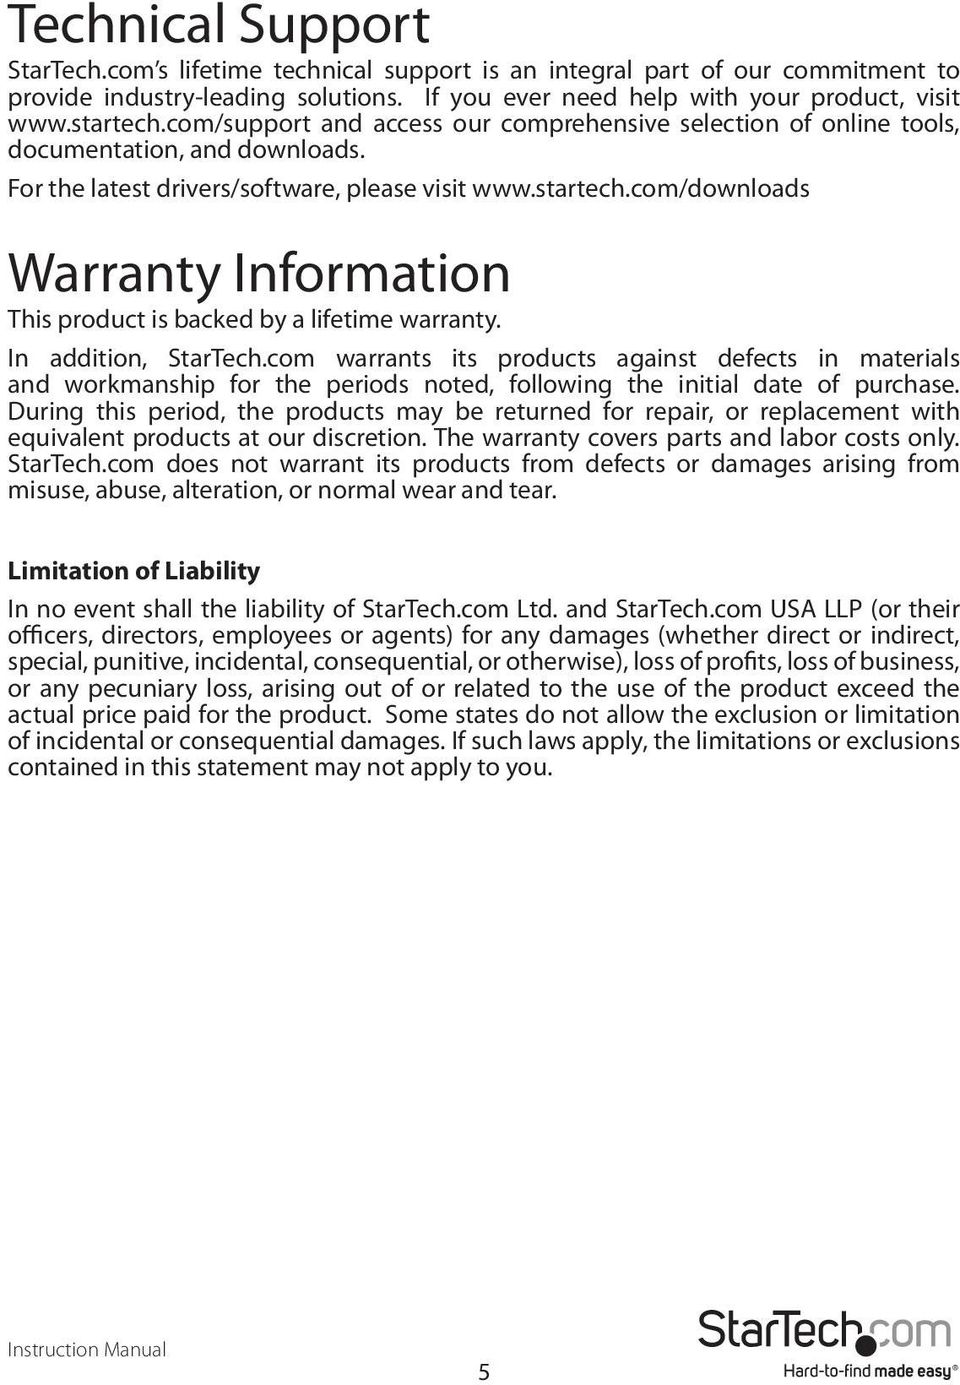 com/downloads Warranty Information This product is backed by a lifetime warranty. In addition, StarTech.